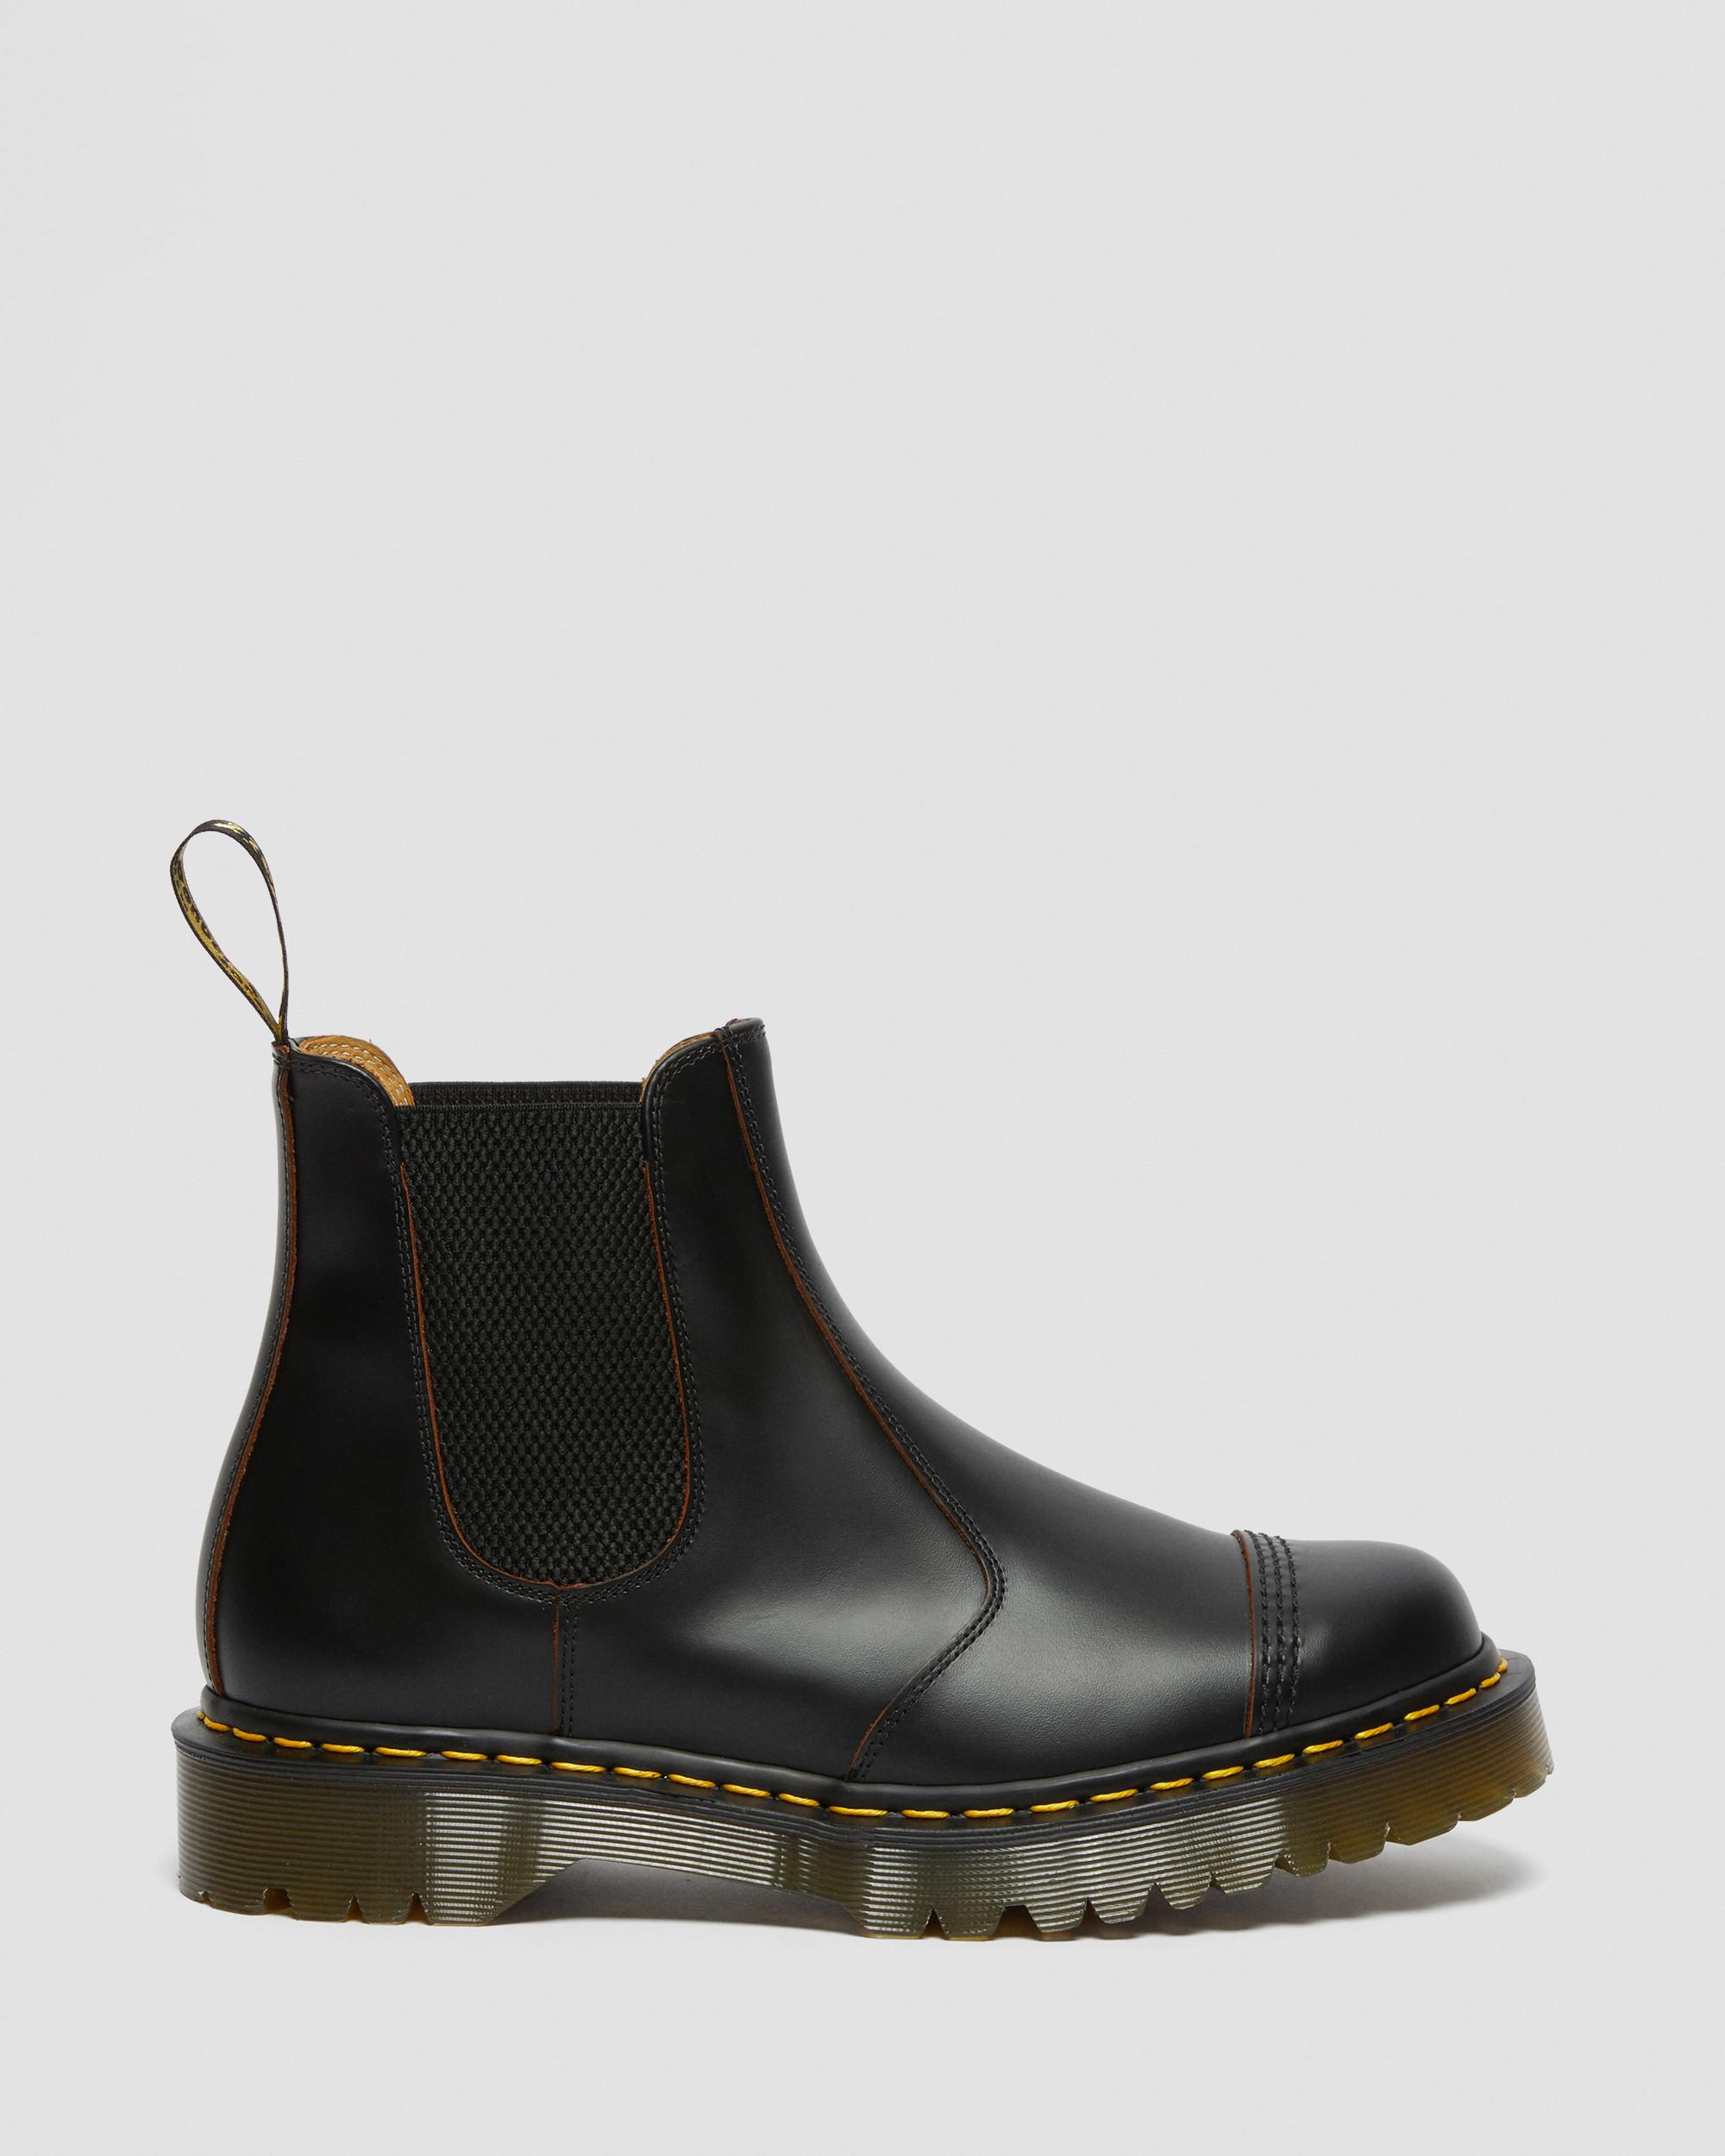 2976 Bex Made in England Toe Cap Chelsea Boots in Black | Dr. Martens